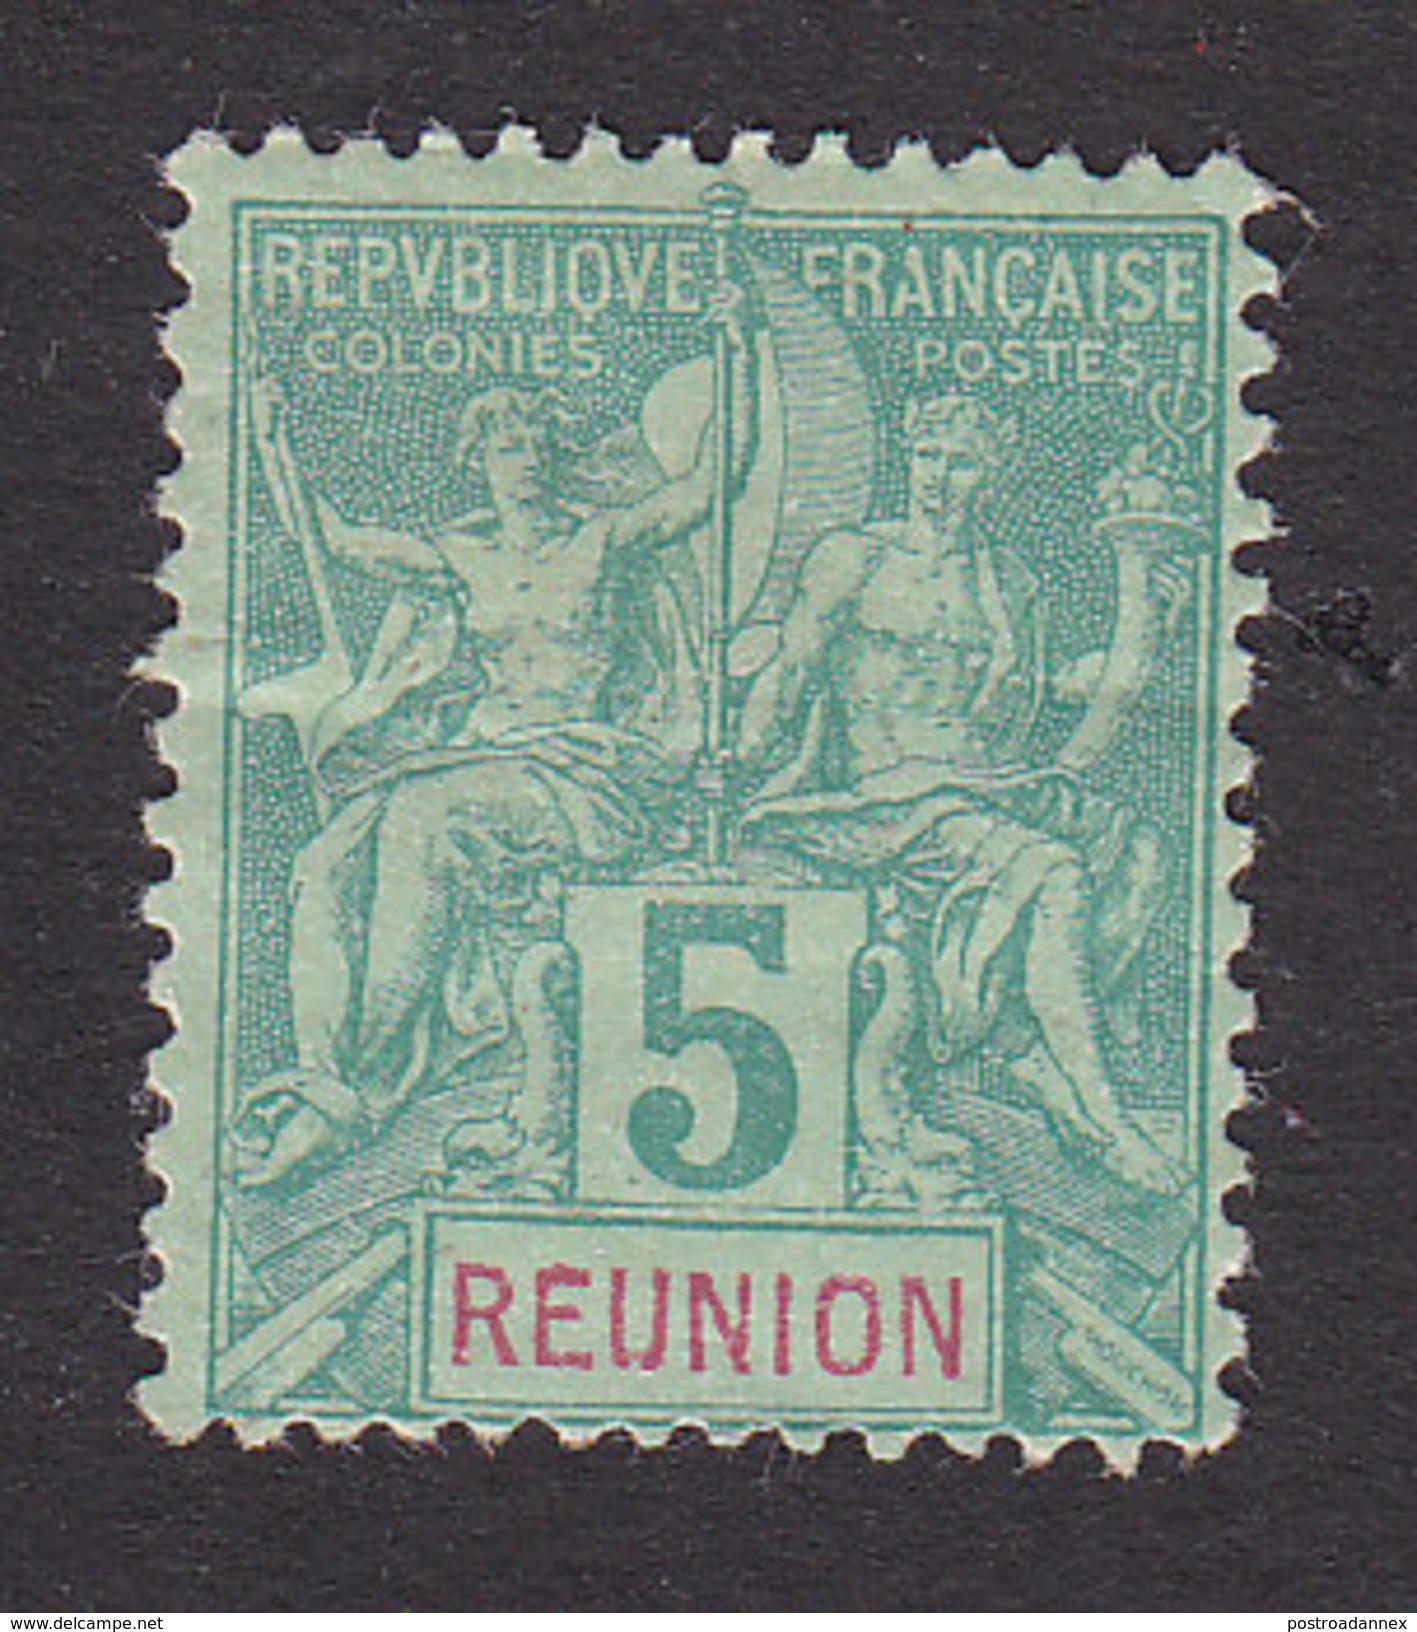 Reunion, Scott #37, Mint Hinged, Navigation And Commerce, Issued 1892 - Neufs